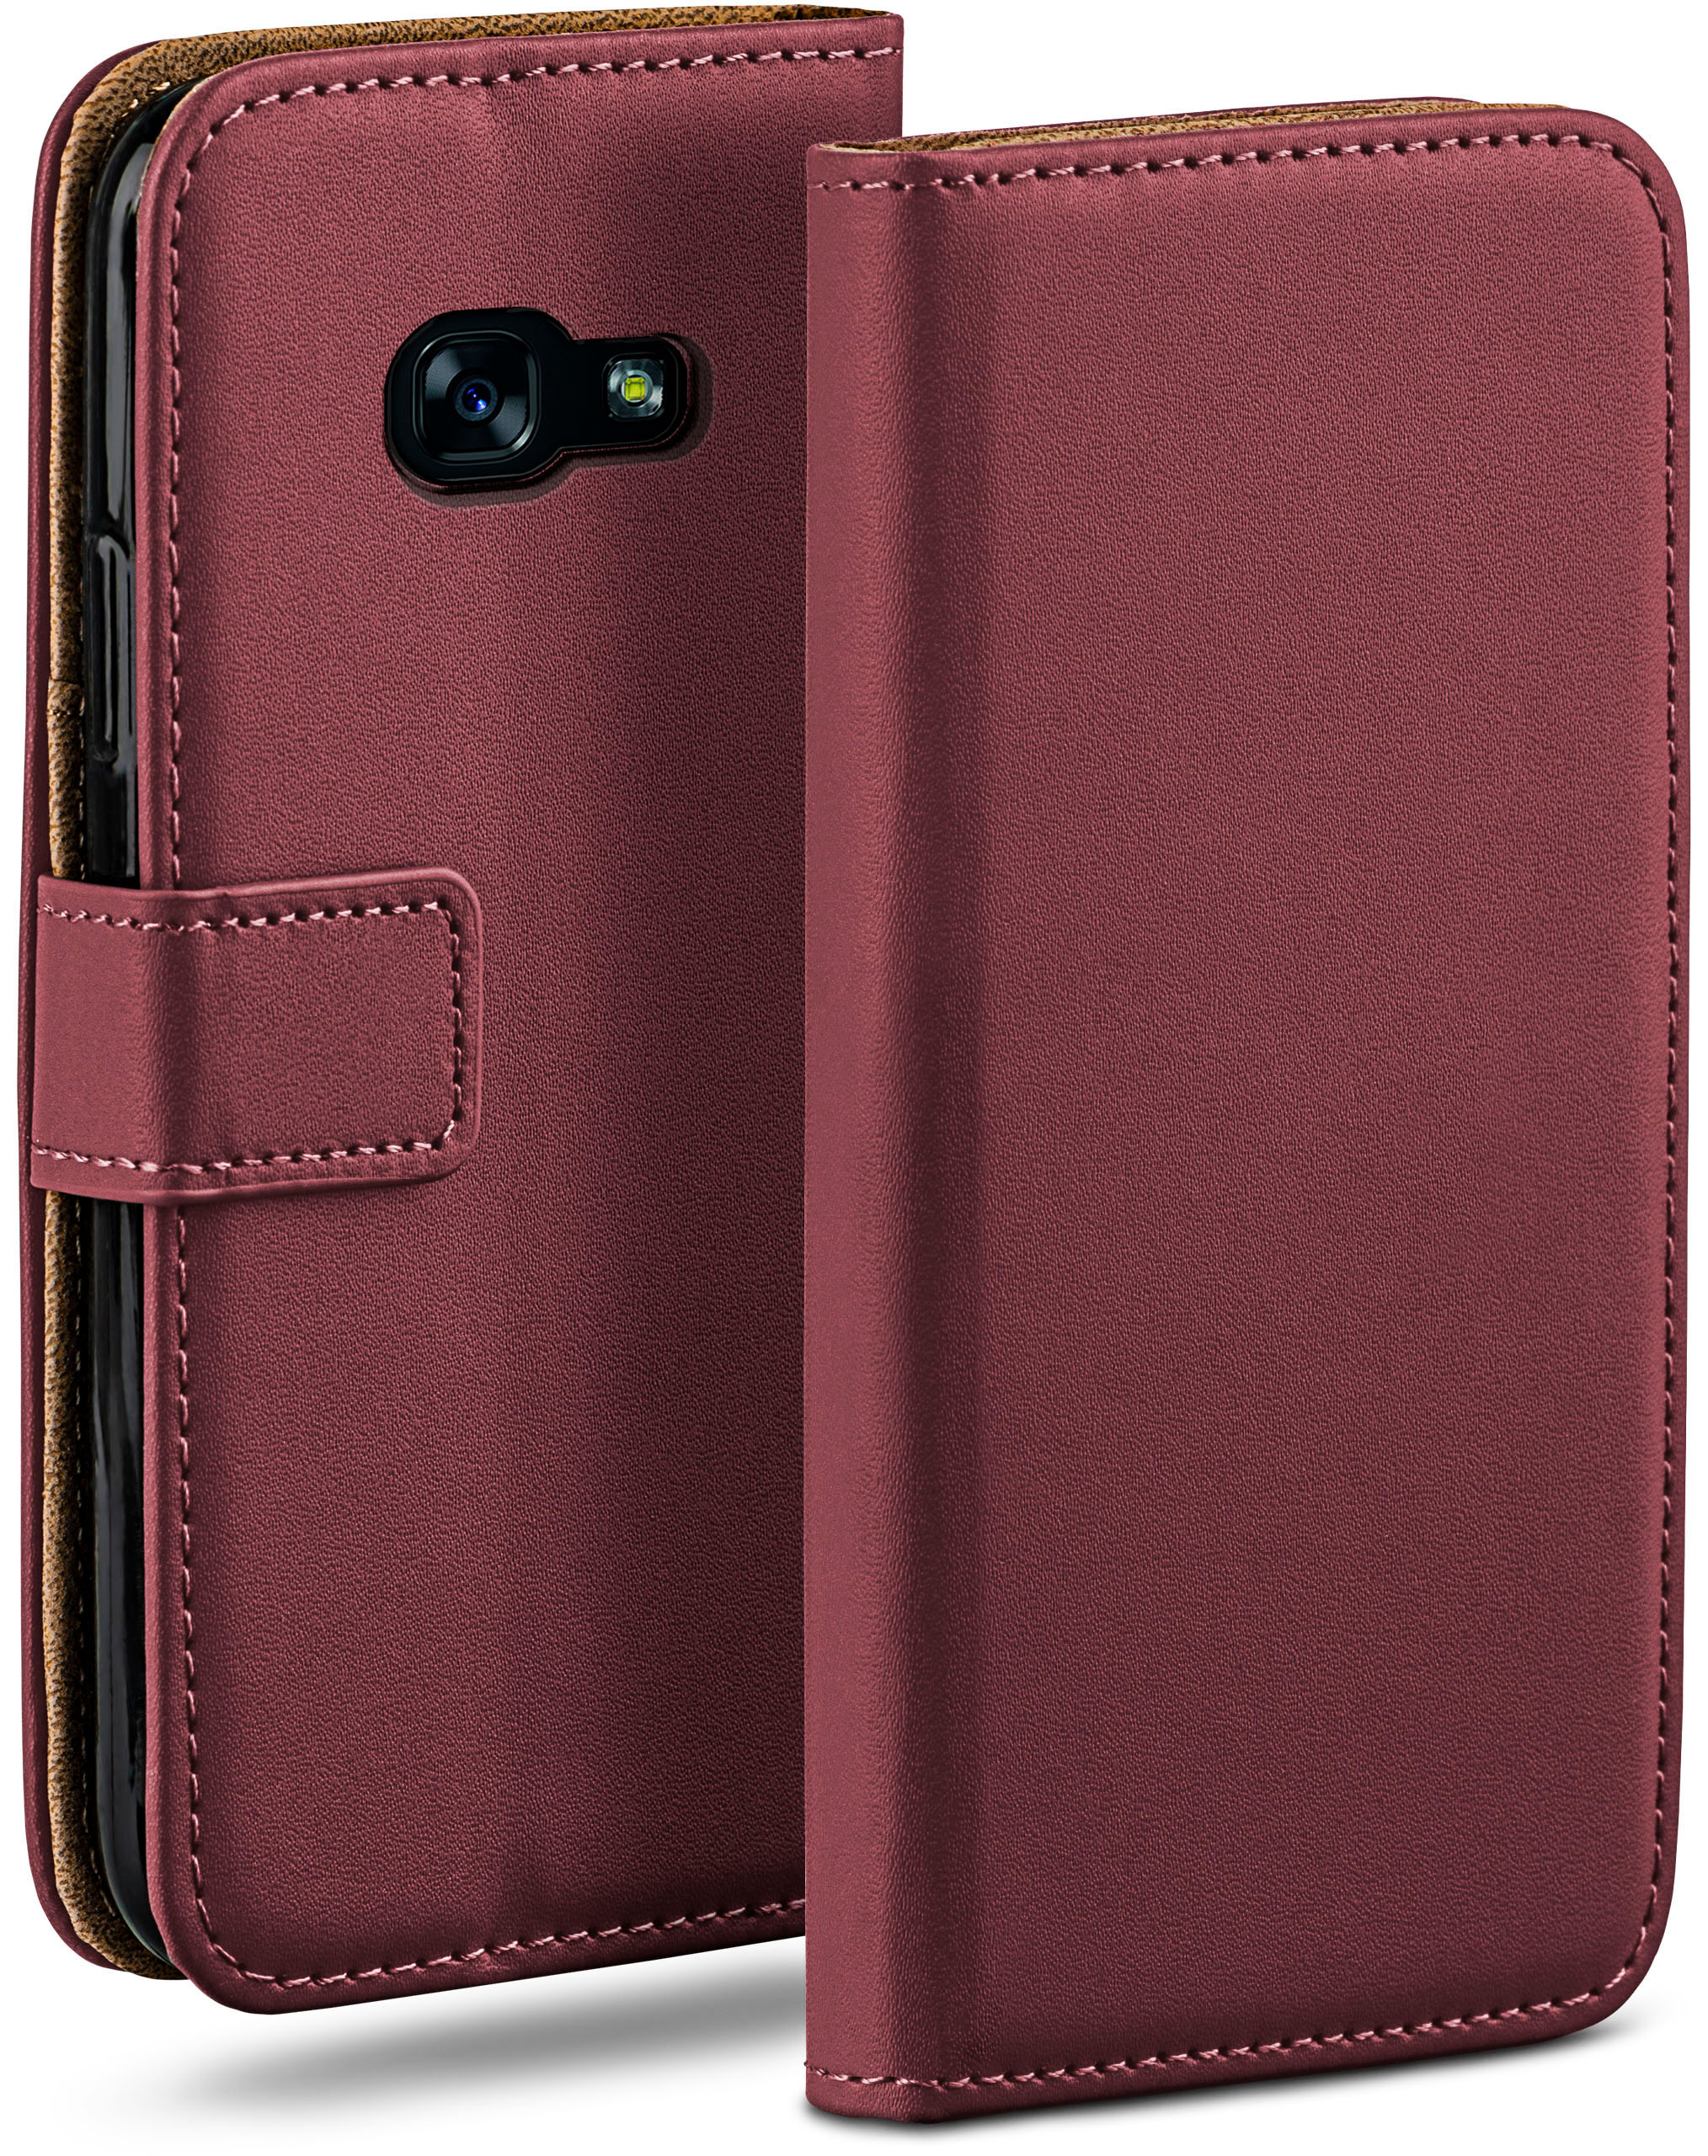 MOEX Bookcover, Book Maroon-Red (2017), Samsung, Case, Galaxy A5